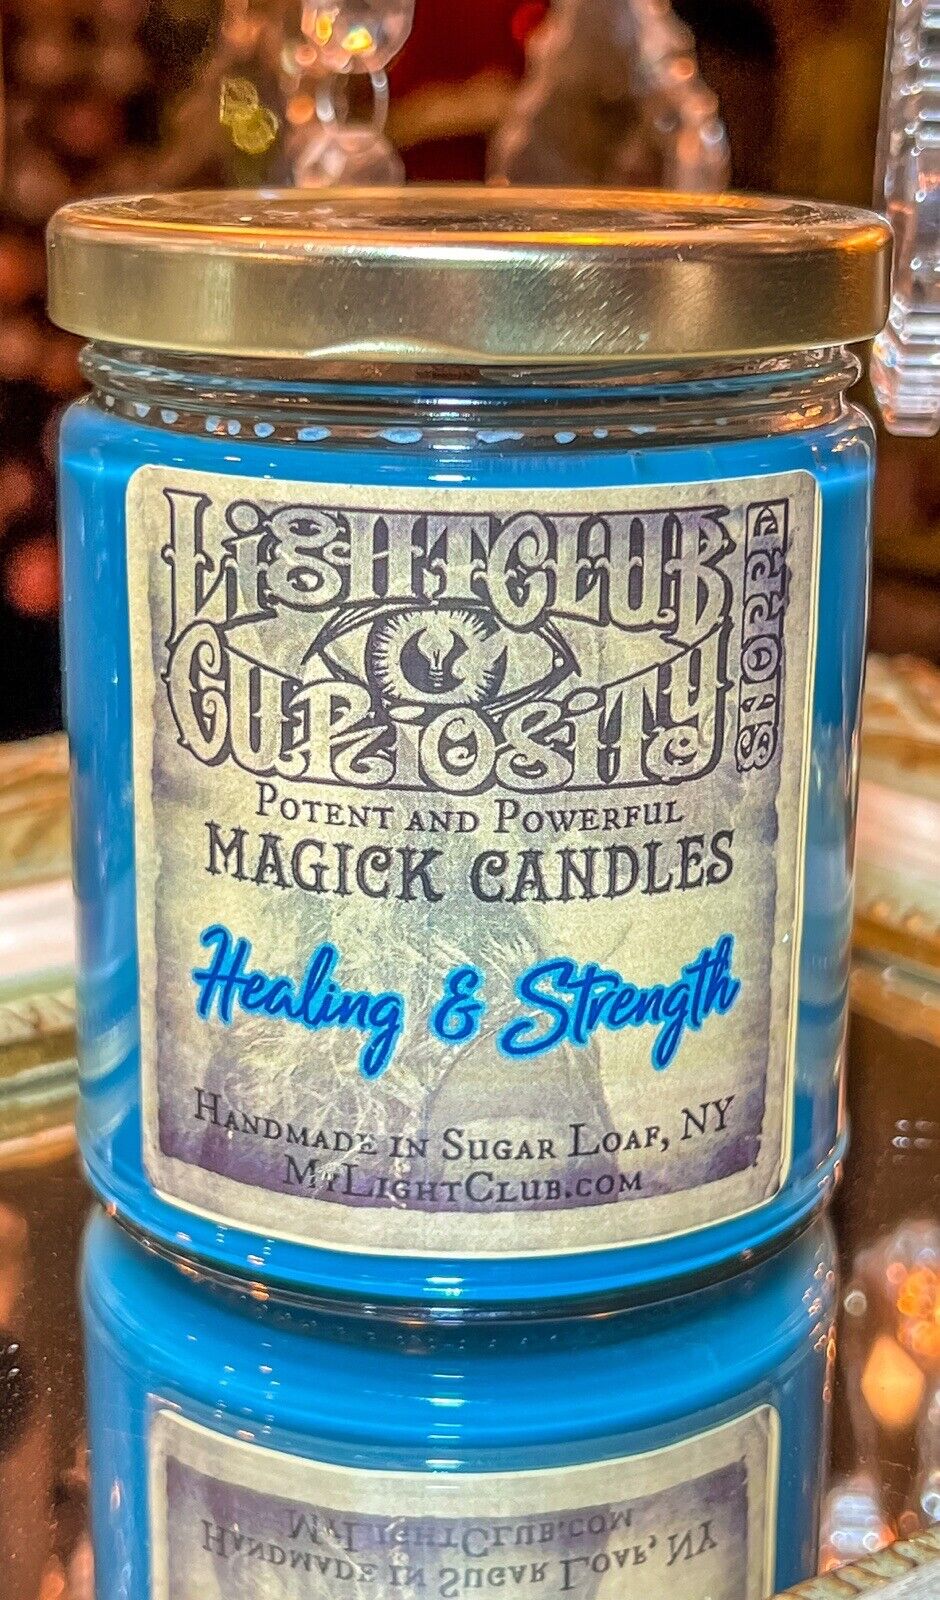 Wiccan Magic Spell Candle for HEALING and STRENGTH - HEALING - POWER